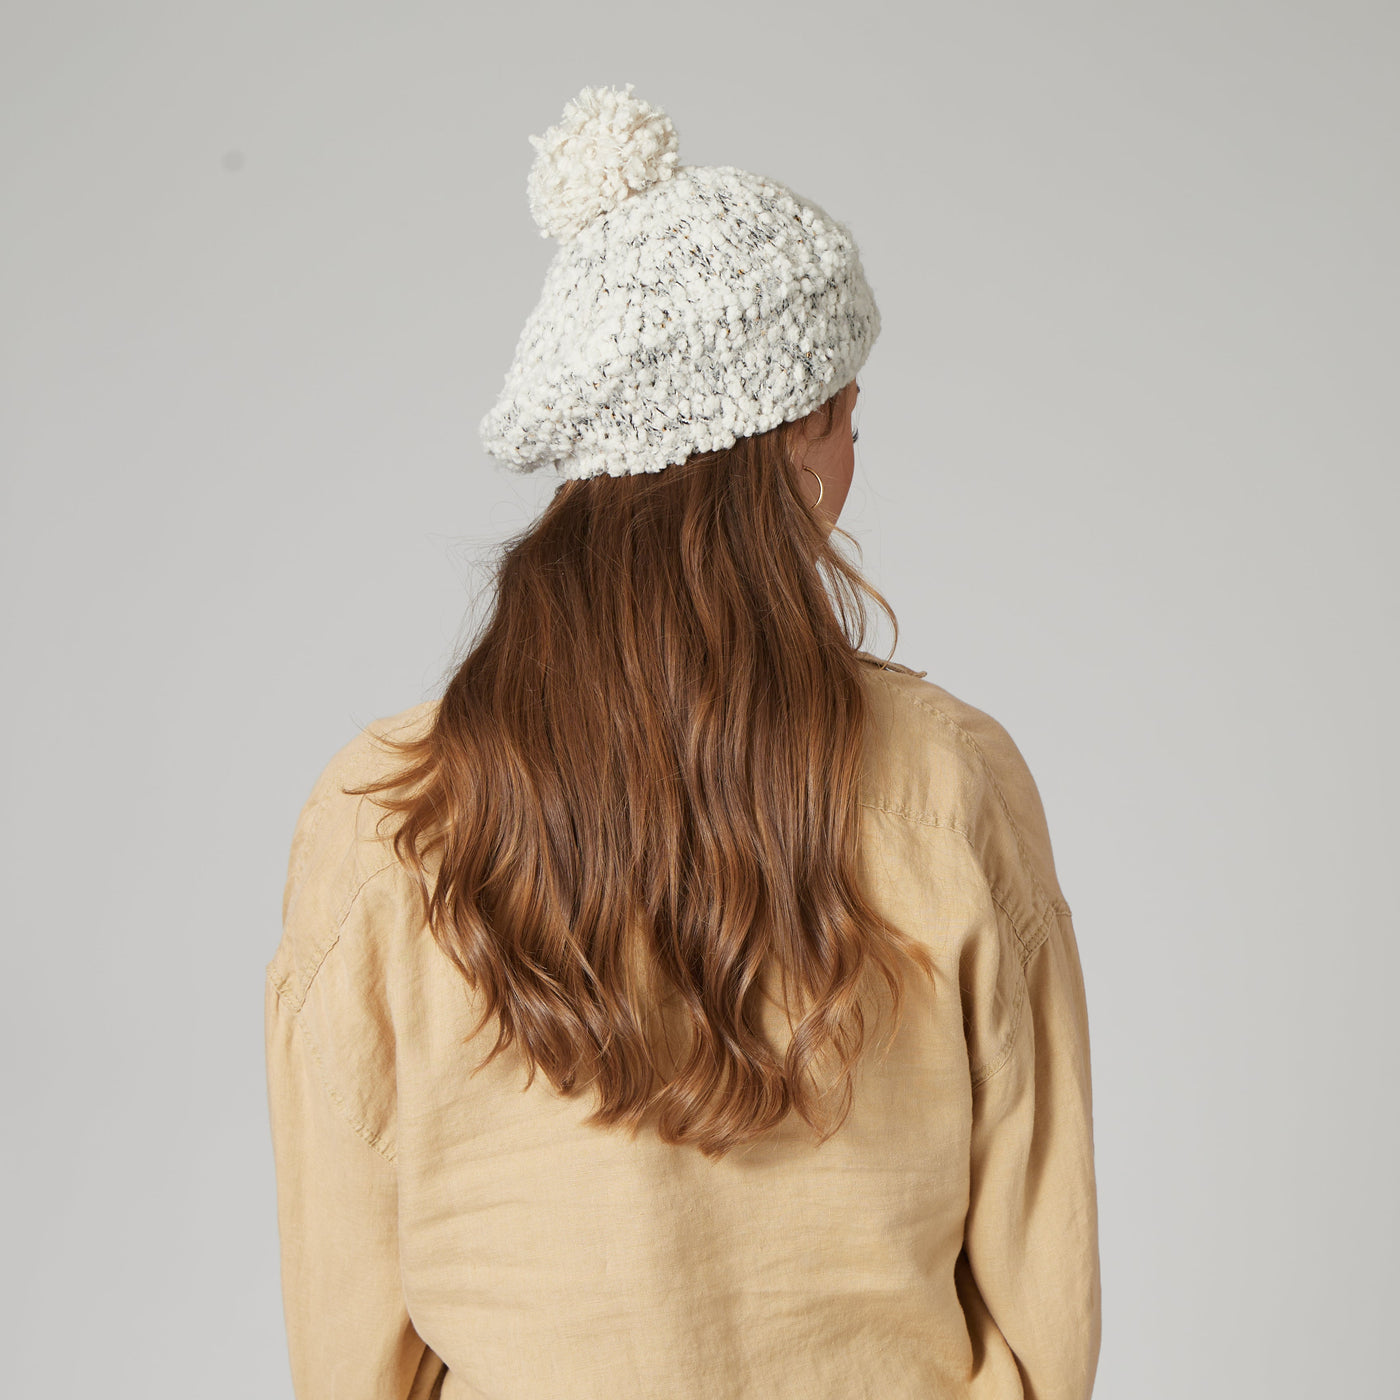 BERET - Womens Plush Textured Yarn Beret With Gold Sequins Woven Into The Yarn-Ivory-One Size